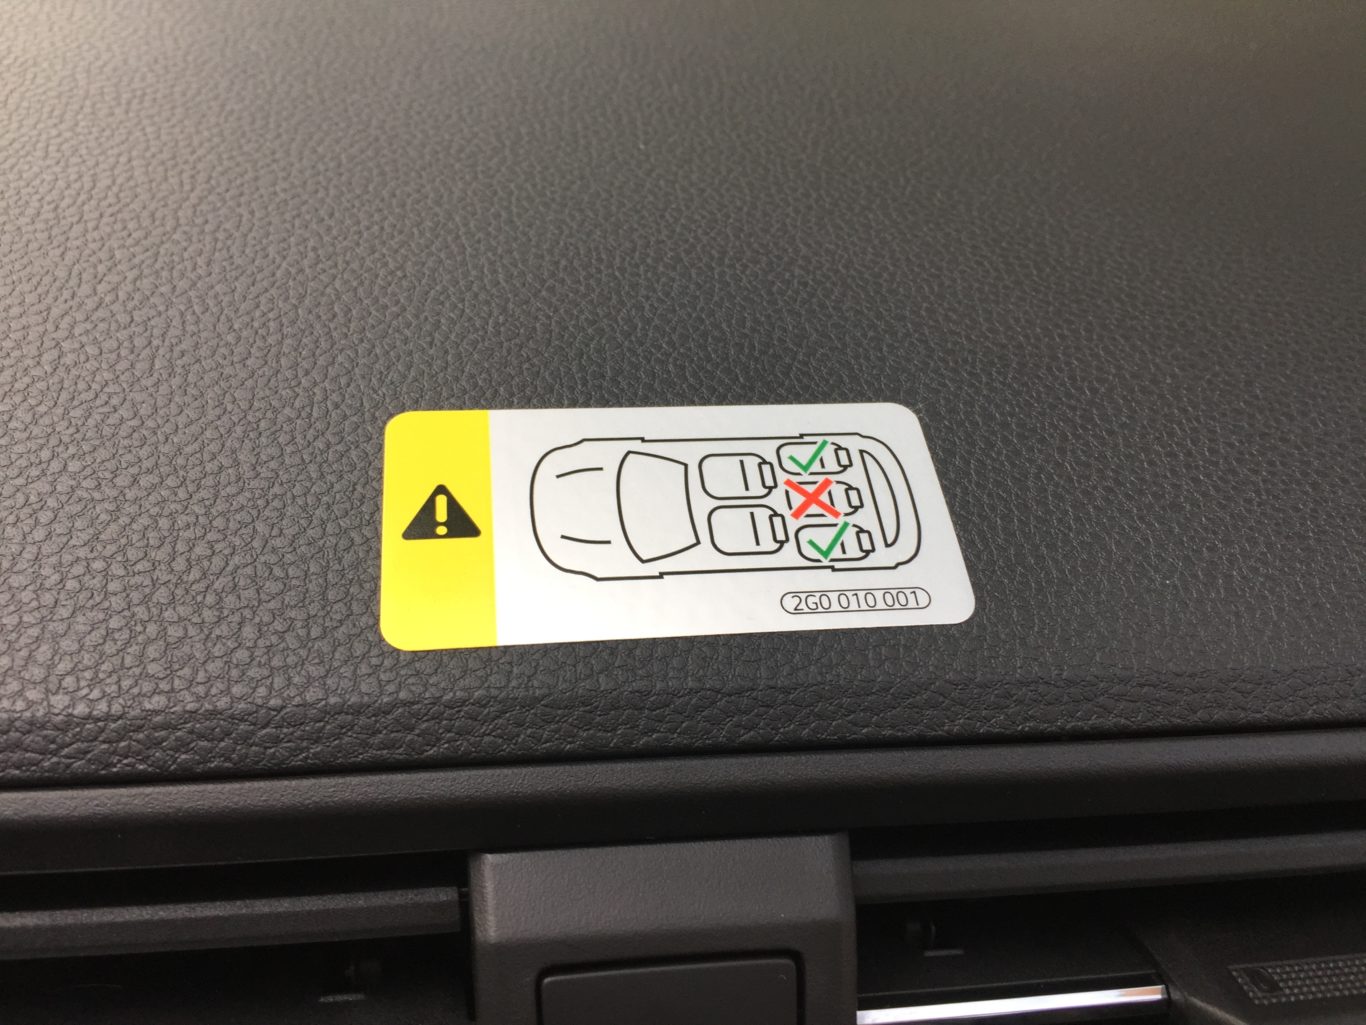 The warning sticker has been applied to the dashboard